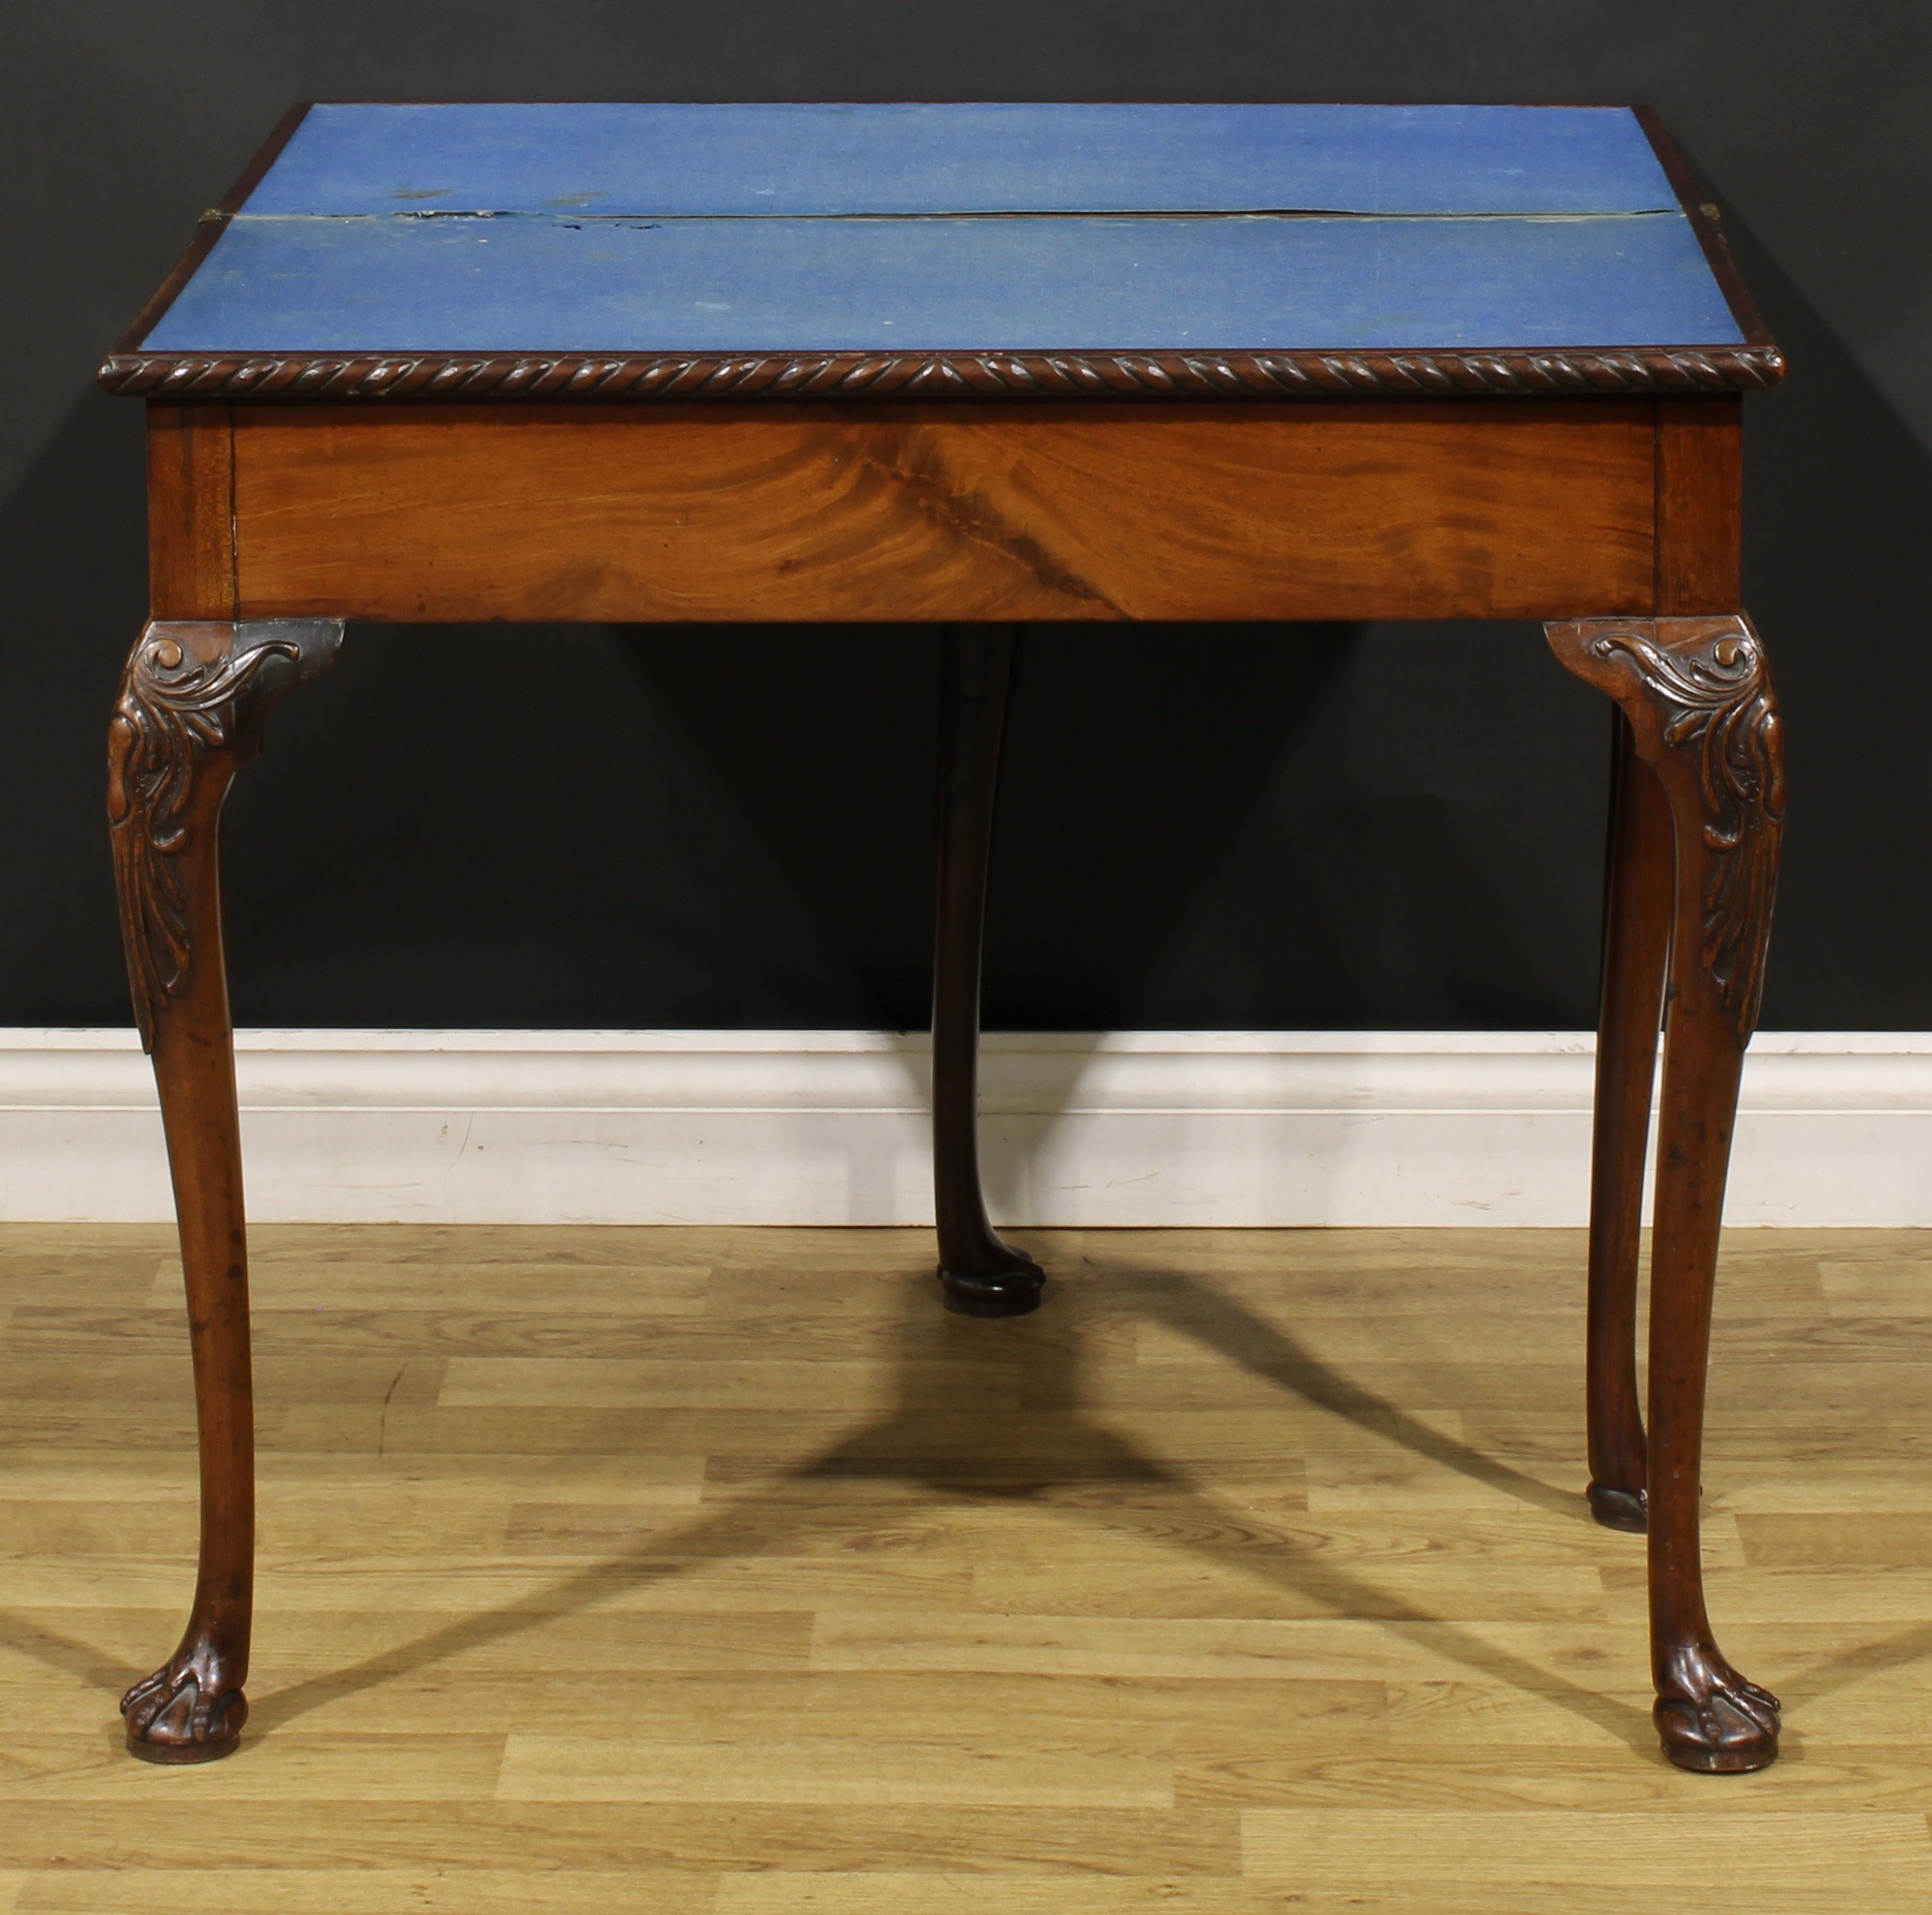 A 19th century mahogany card table, possibly Irish, hinged top with gadroon-and-ribbon edge - Image 3 of 6